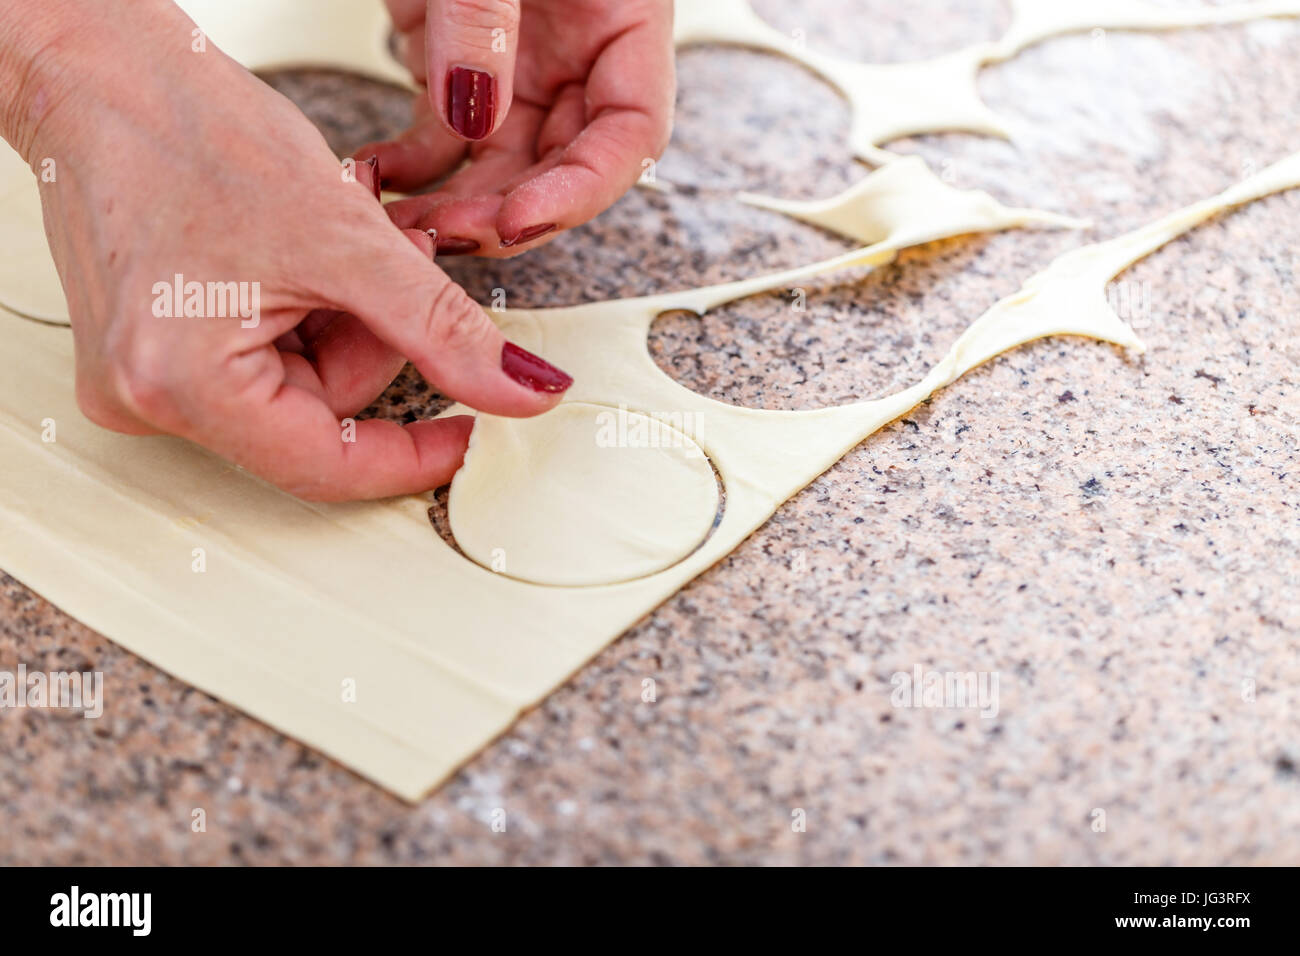 Woman hand cutting out round shaped biscuits from dough Stock Photo